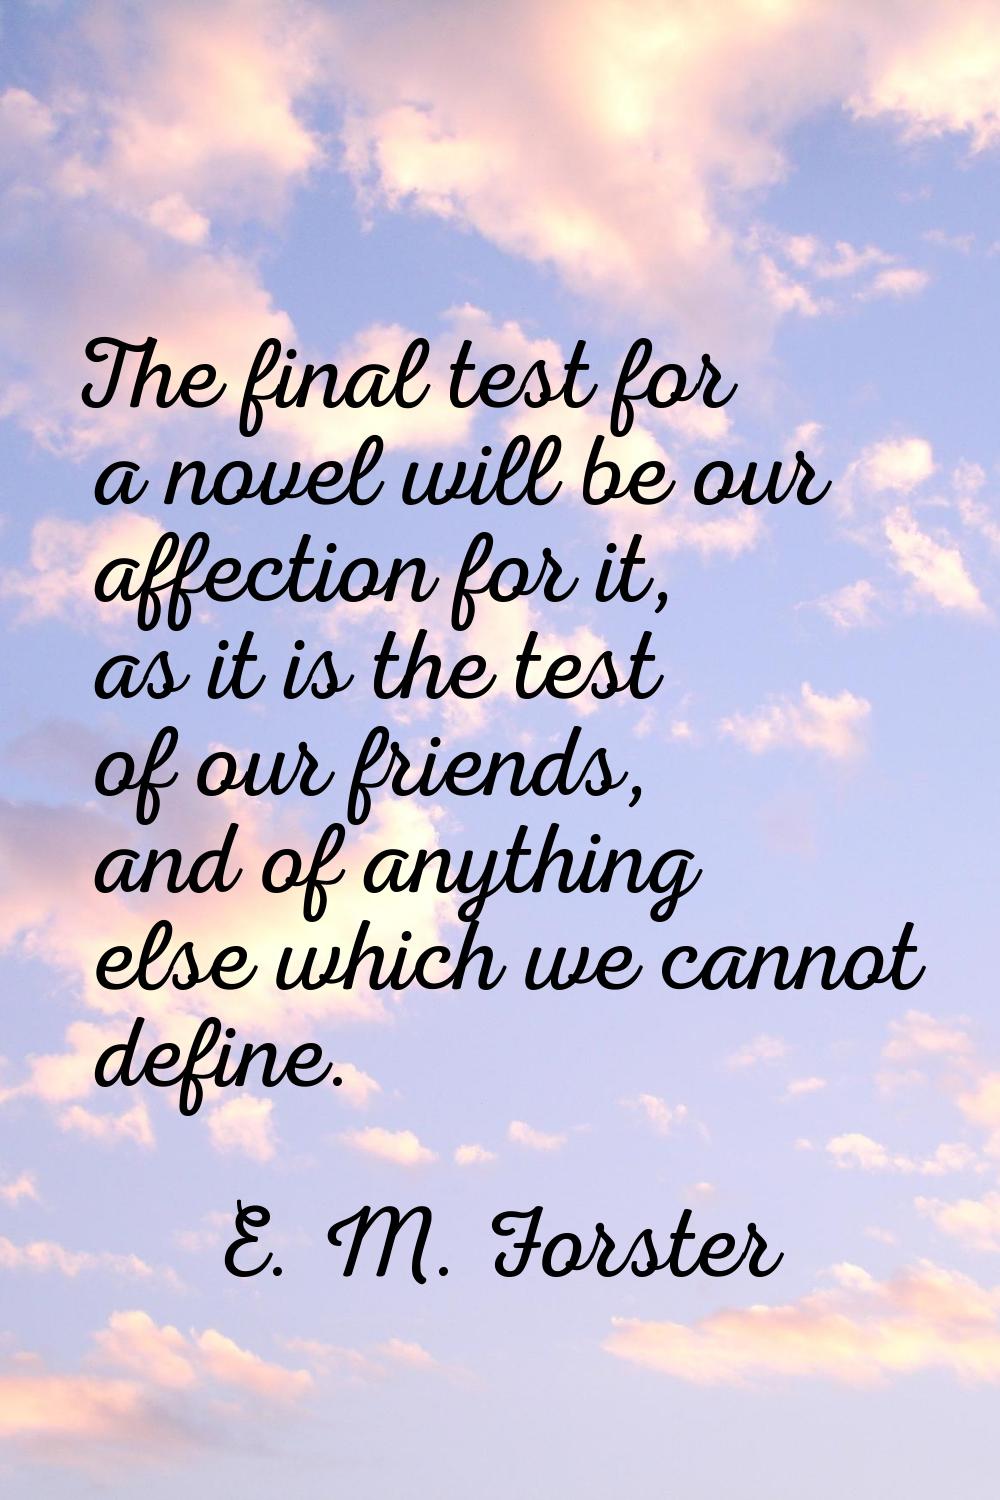 The final test for a novel will be our affection for it, as it is the test of our friends, and of a